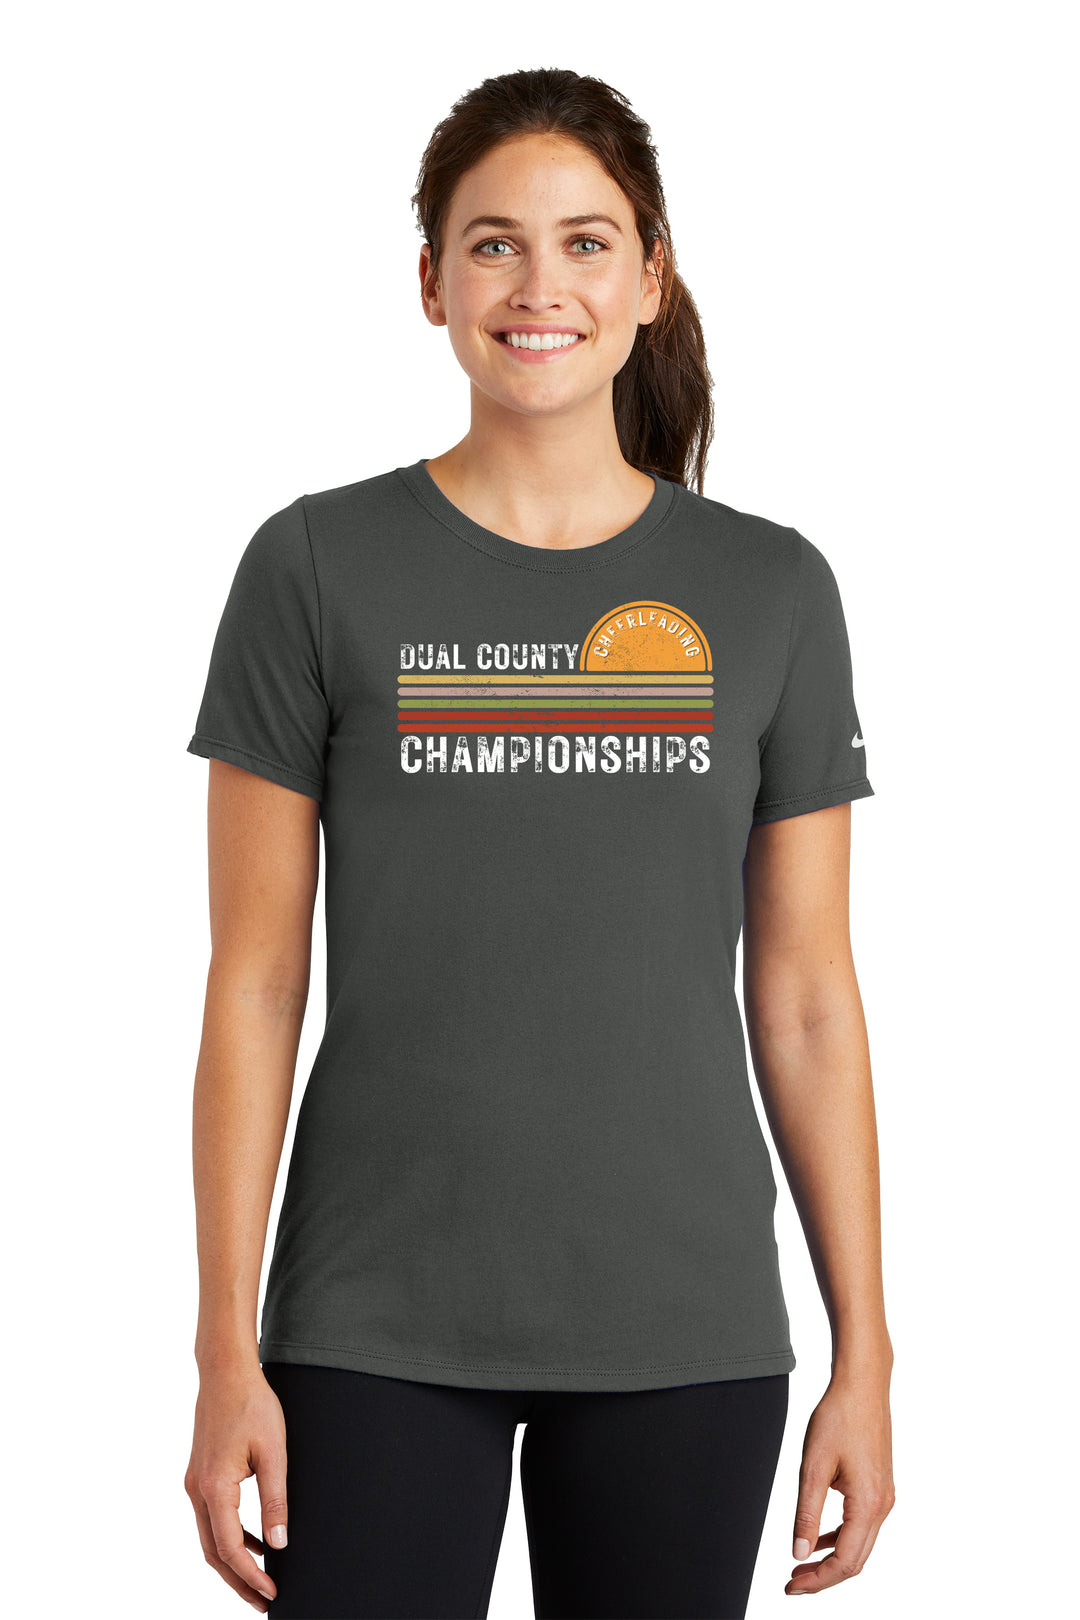 DCL Cheer Championship- Ladies Nike Dri FIT Cotton/Poly Scoop Neck Tee (NKBQ5234)